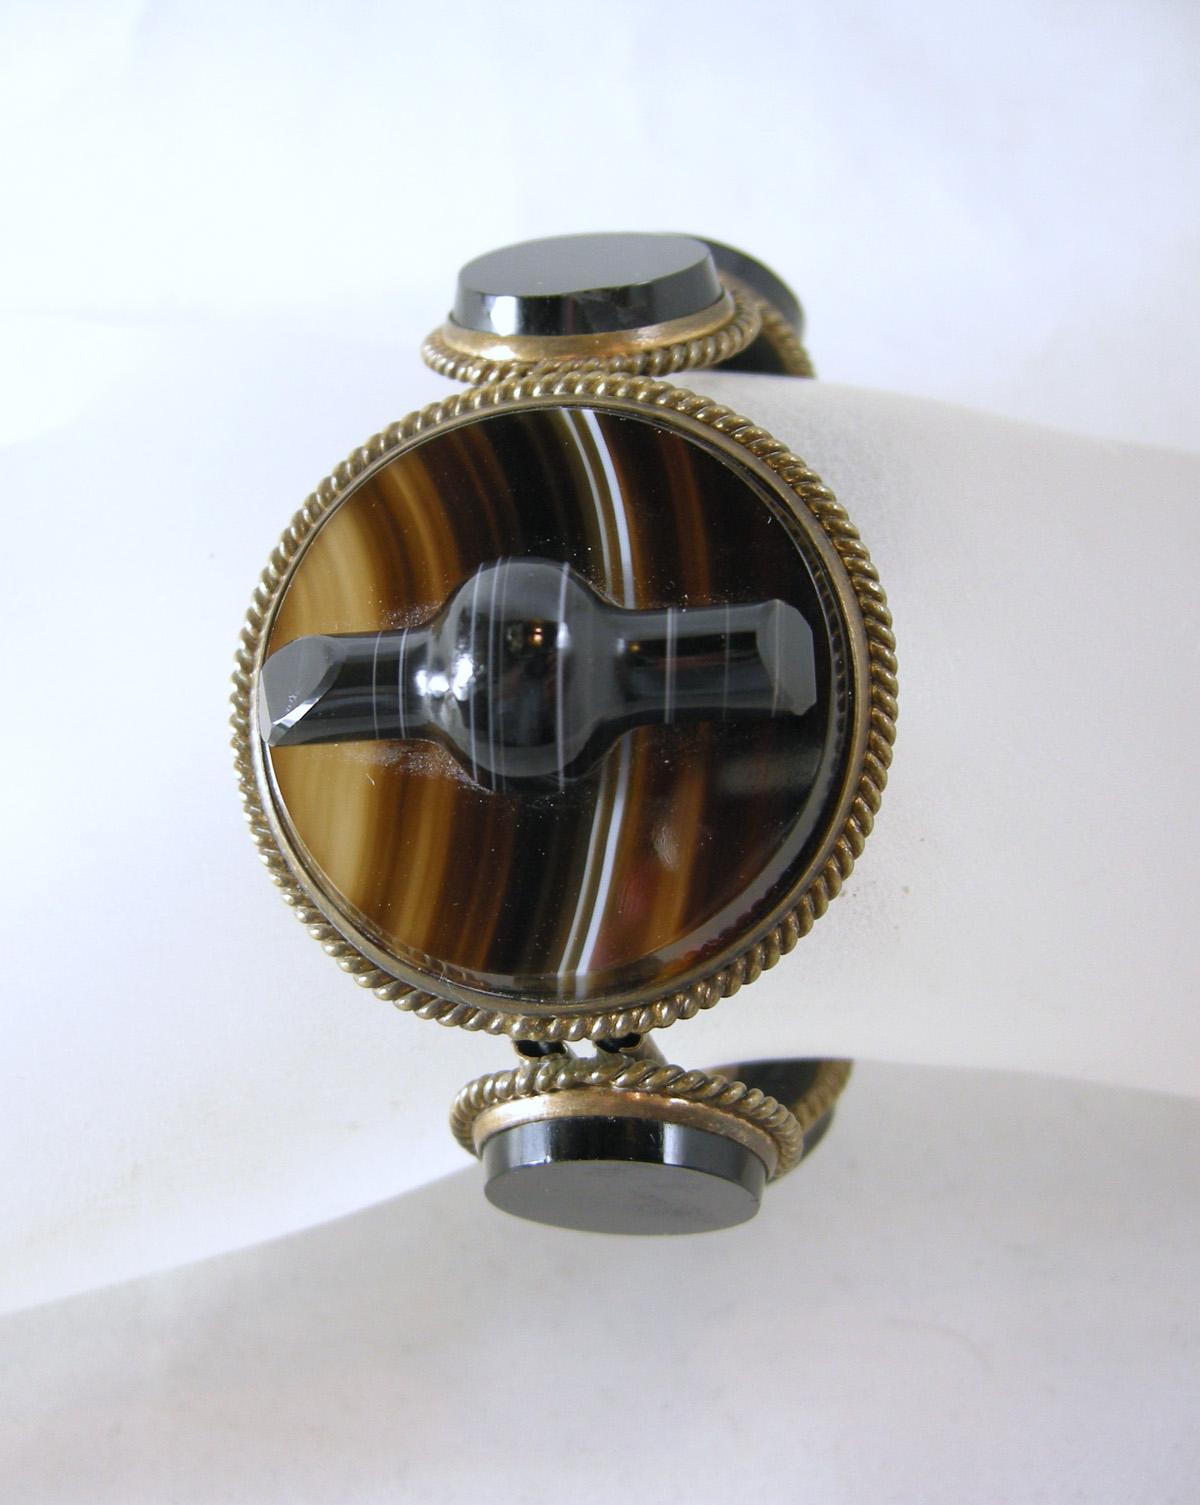 This is an exceptional Victorian Scottish banded agate bracelet and pin set.  The bracelet is a stretch bracelet in brown agate with a banded agate center.  It is sterling silver with a gold wash.  The bracelet will fit a size 6 to 7.  The front